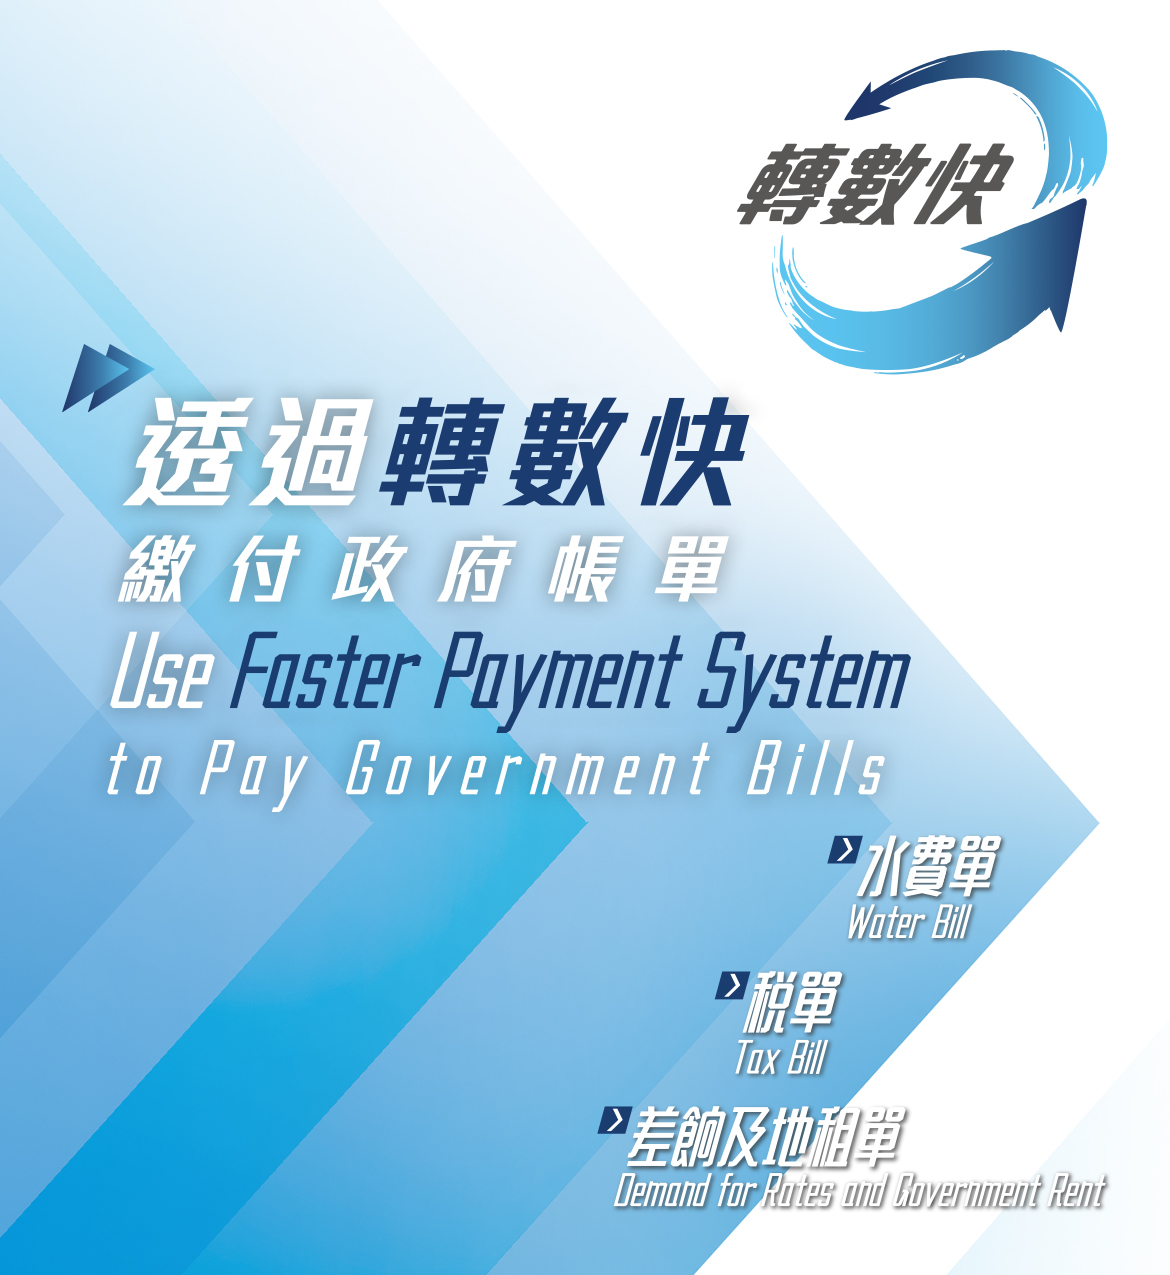 Leaflet - Making payments to Government